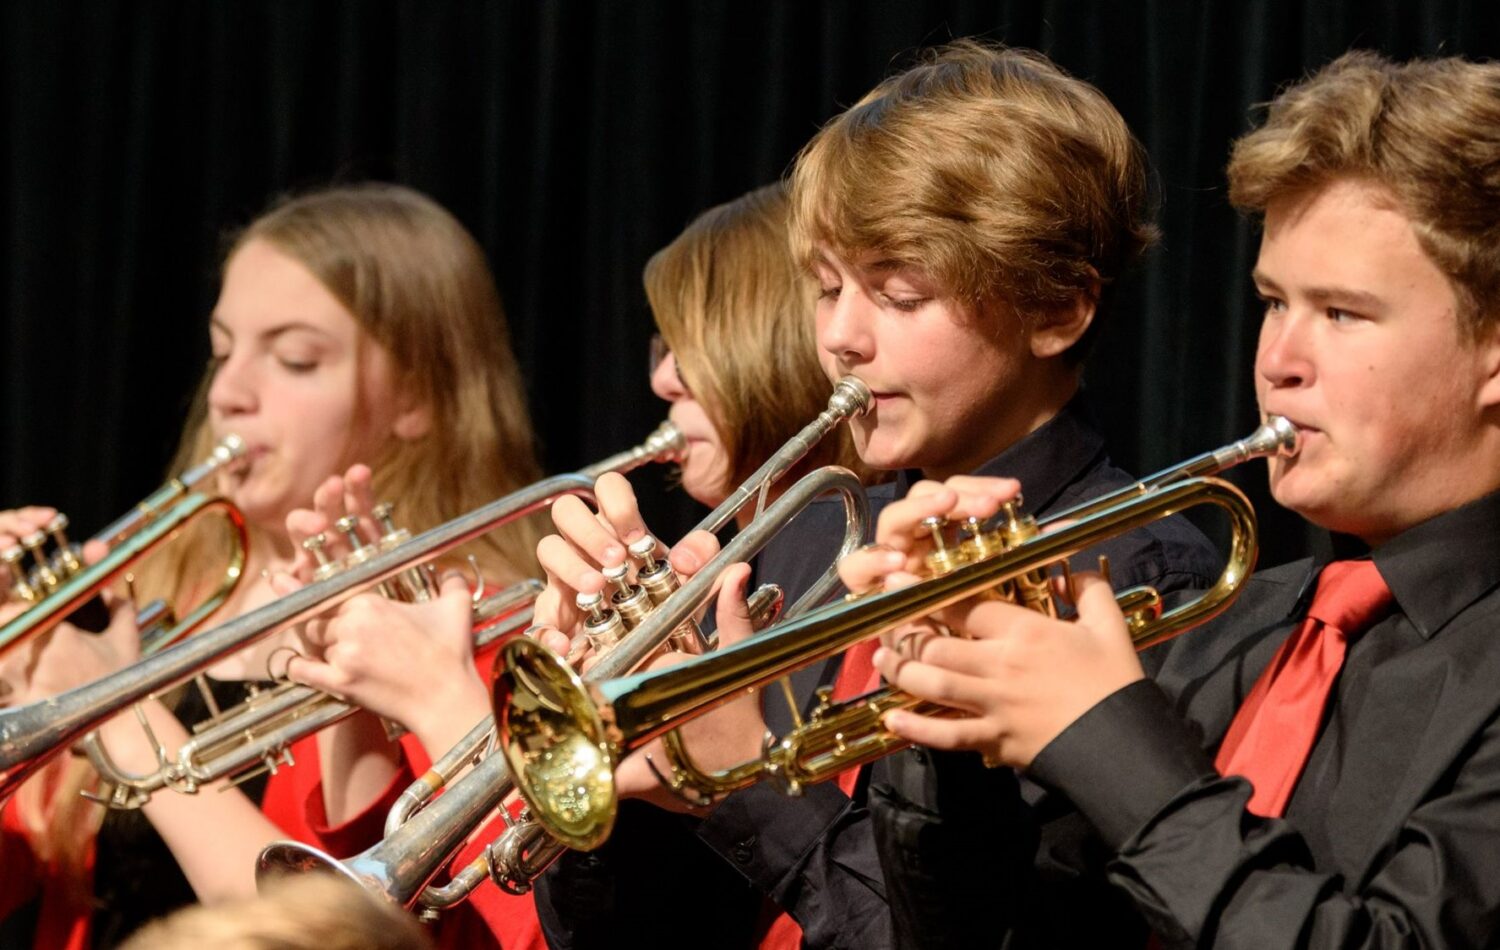 A group of children play trumpets at a concert. Two are boys and two are girls.